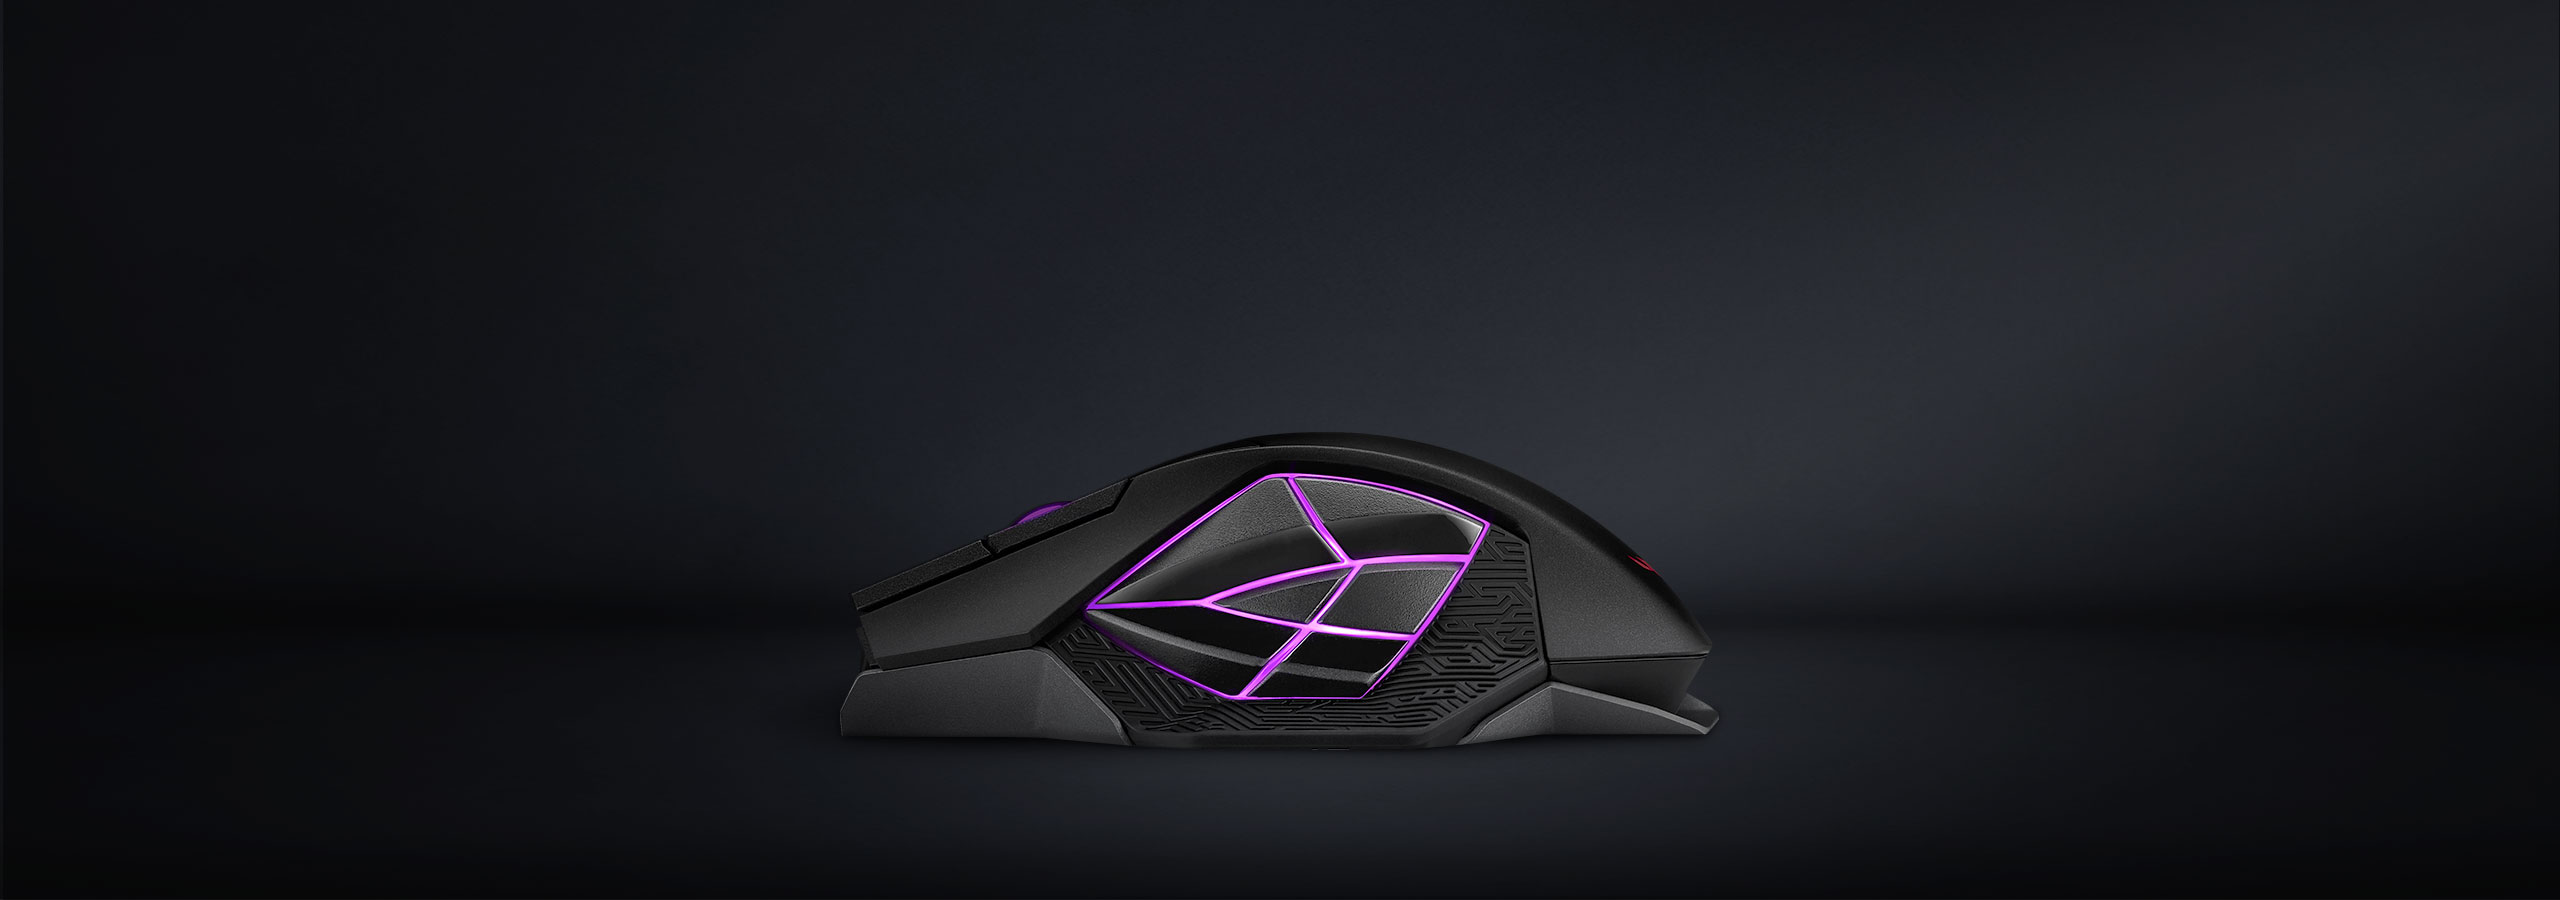 ROG Spatha X features six side buttons with RGB lighting, side view